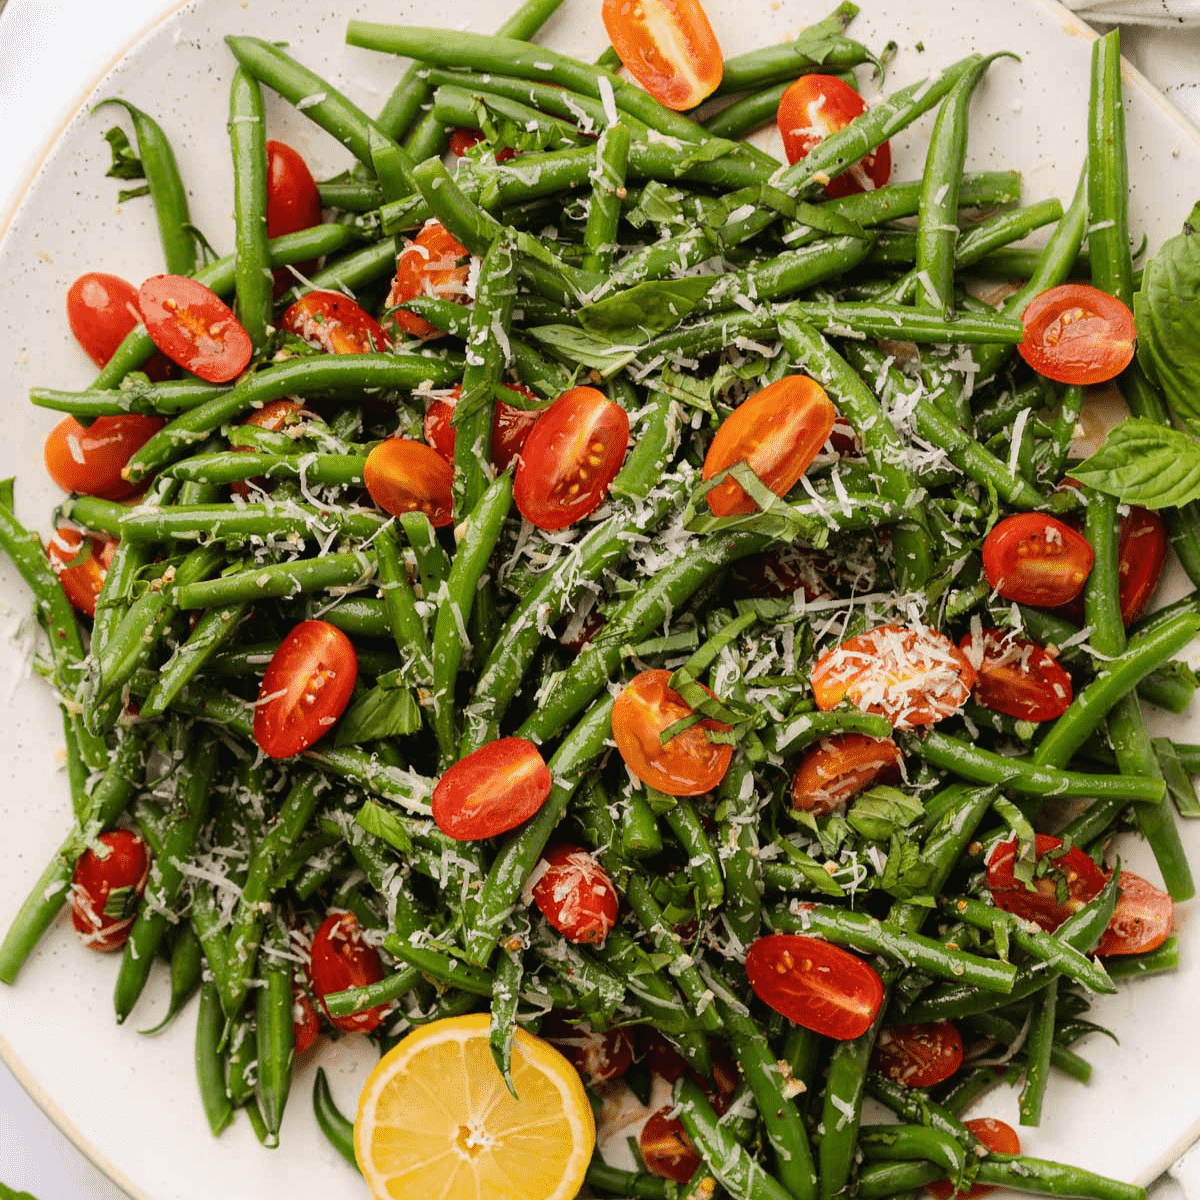 Easy Italian Green Bean Salad with Tomatoes - A Full Living